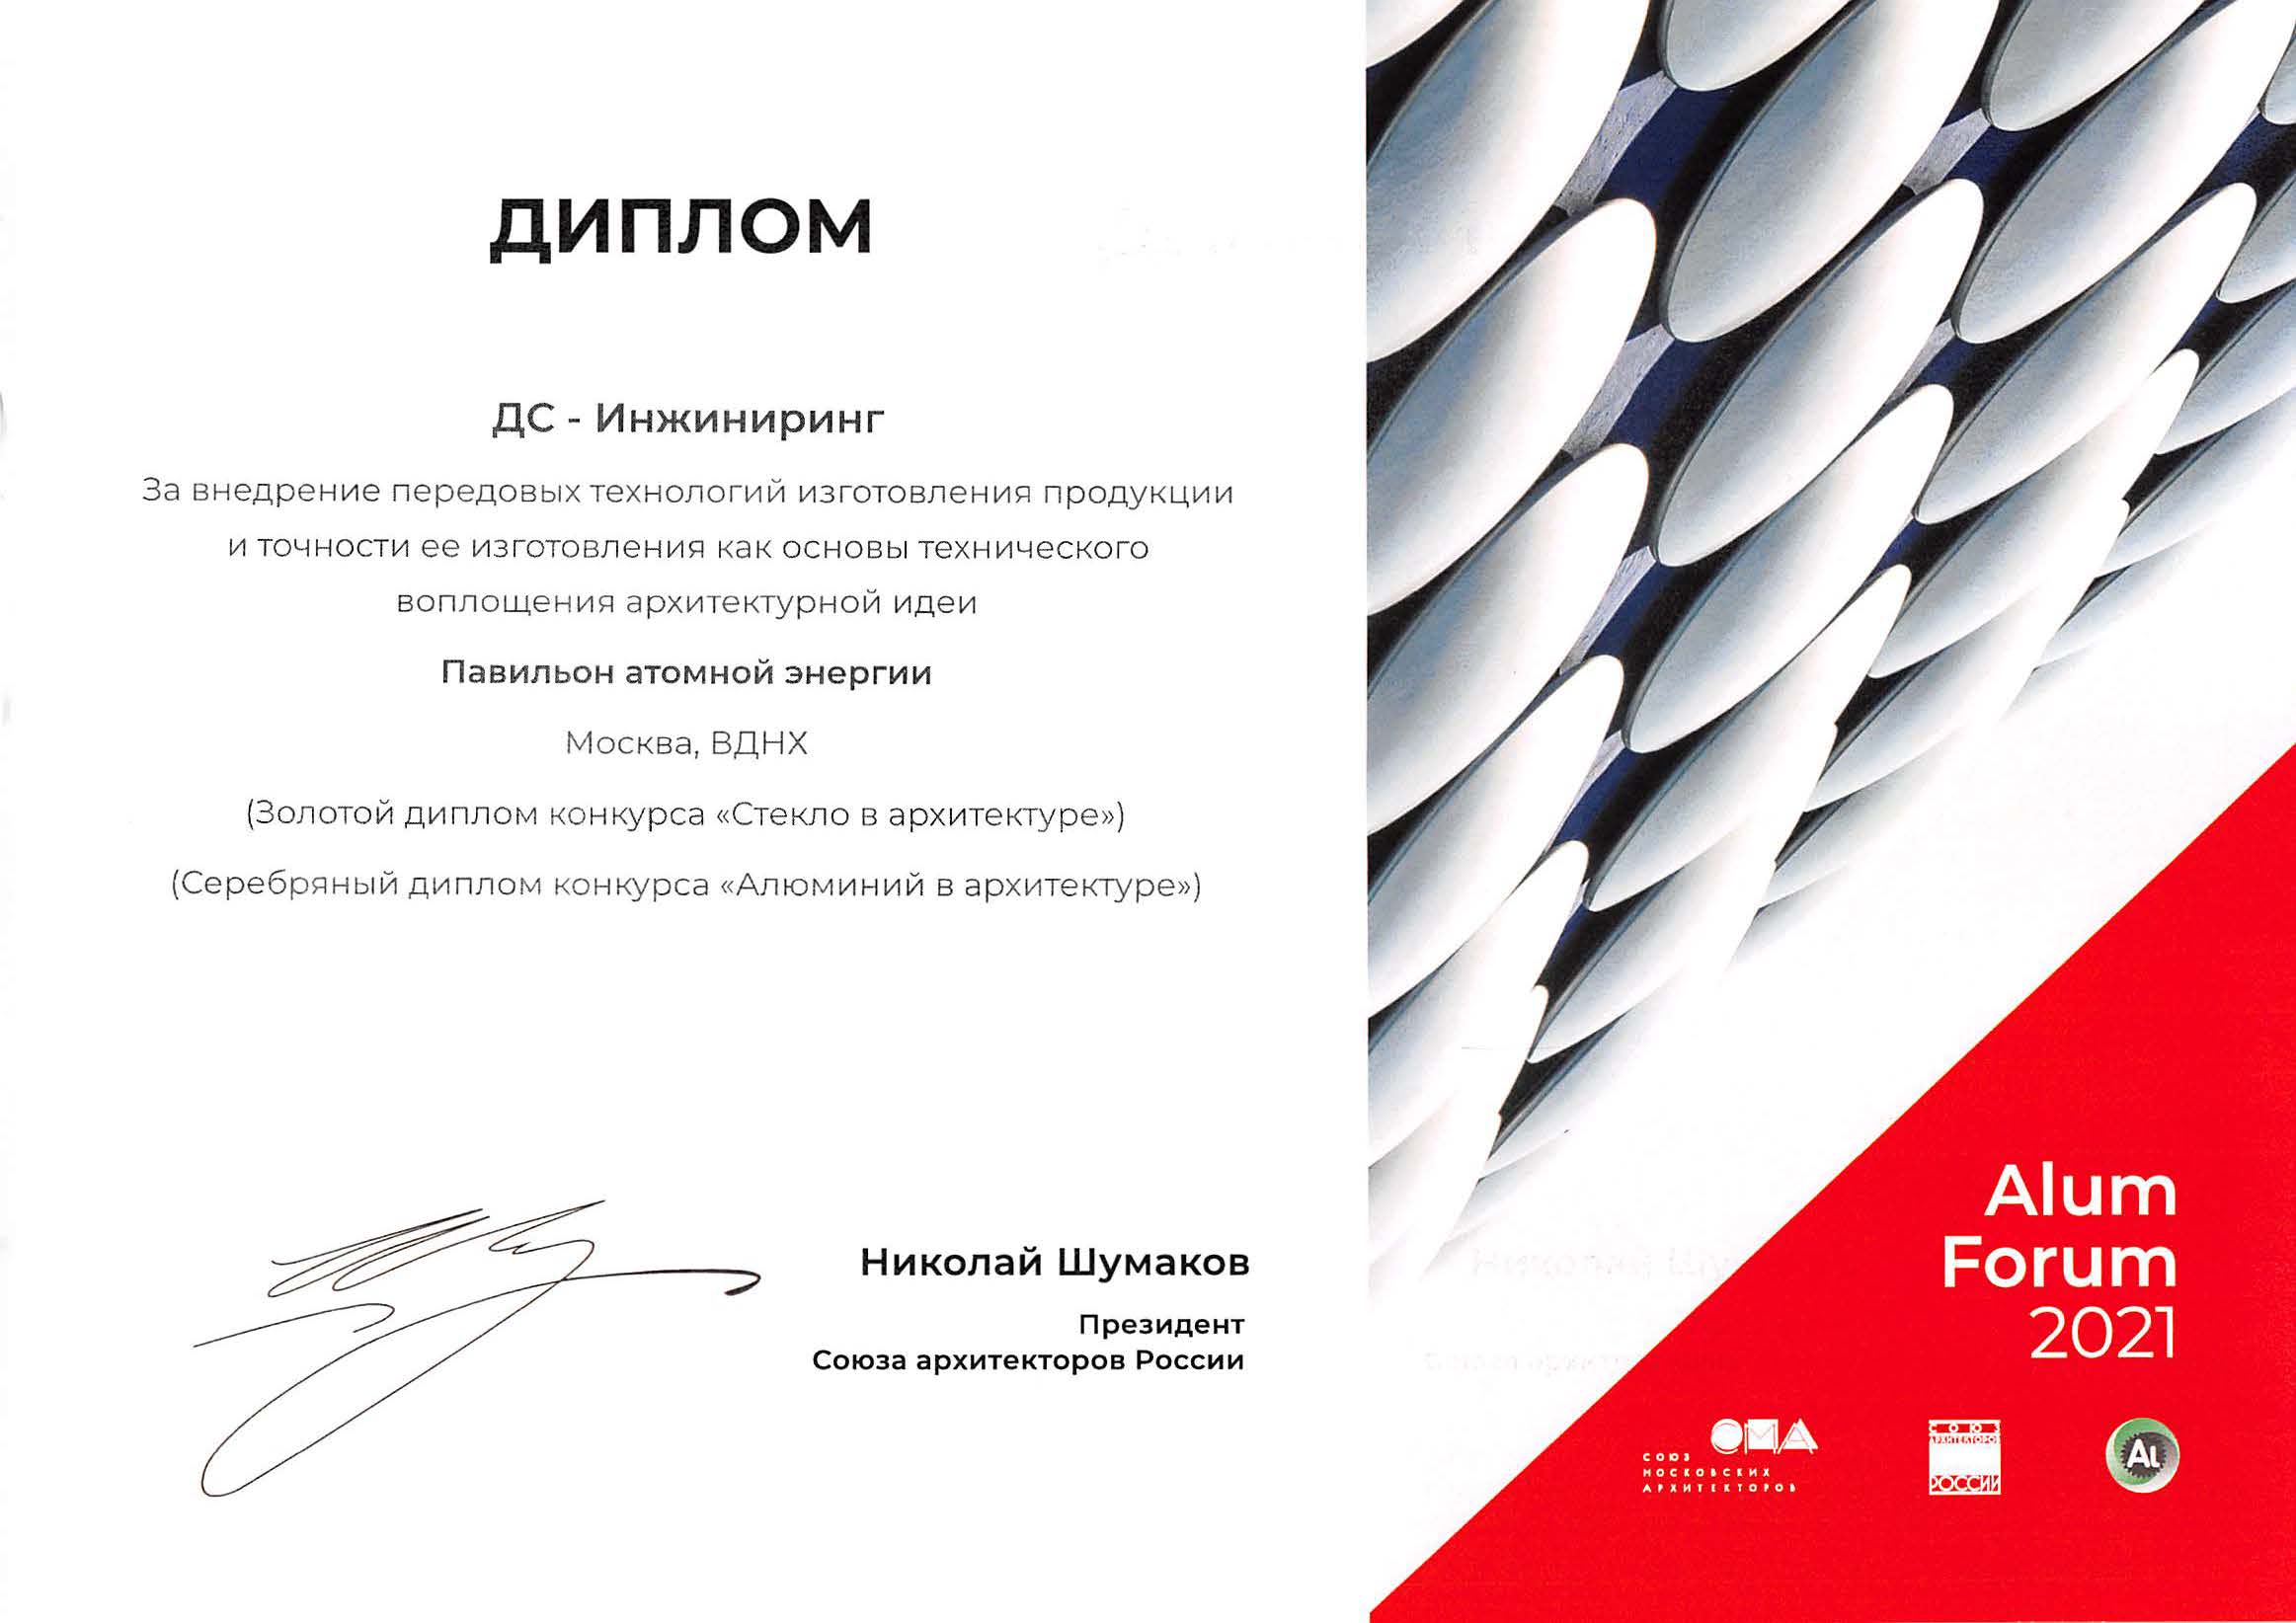 LLC “DS-Engineering” was awarded the Golden Diploma of the competition “Glass in architecture” in the nomination “Object of new construction”: Atomic Energy Pavilion (ROSATOM) at VDNH